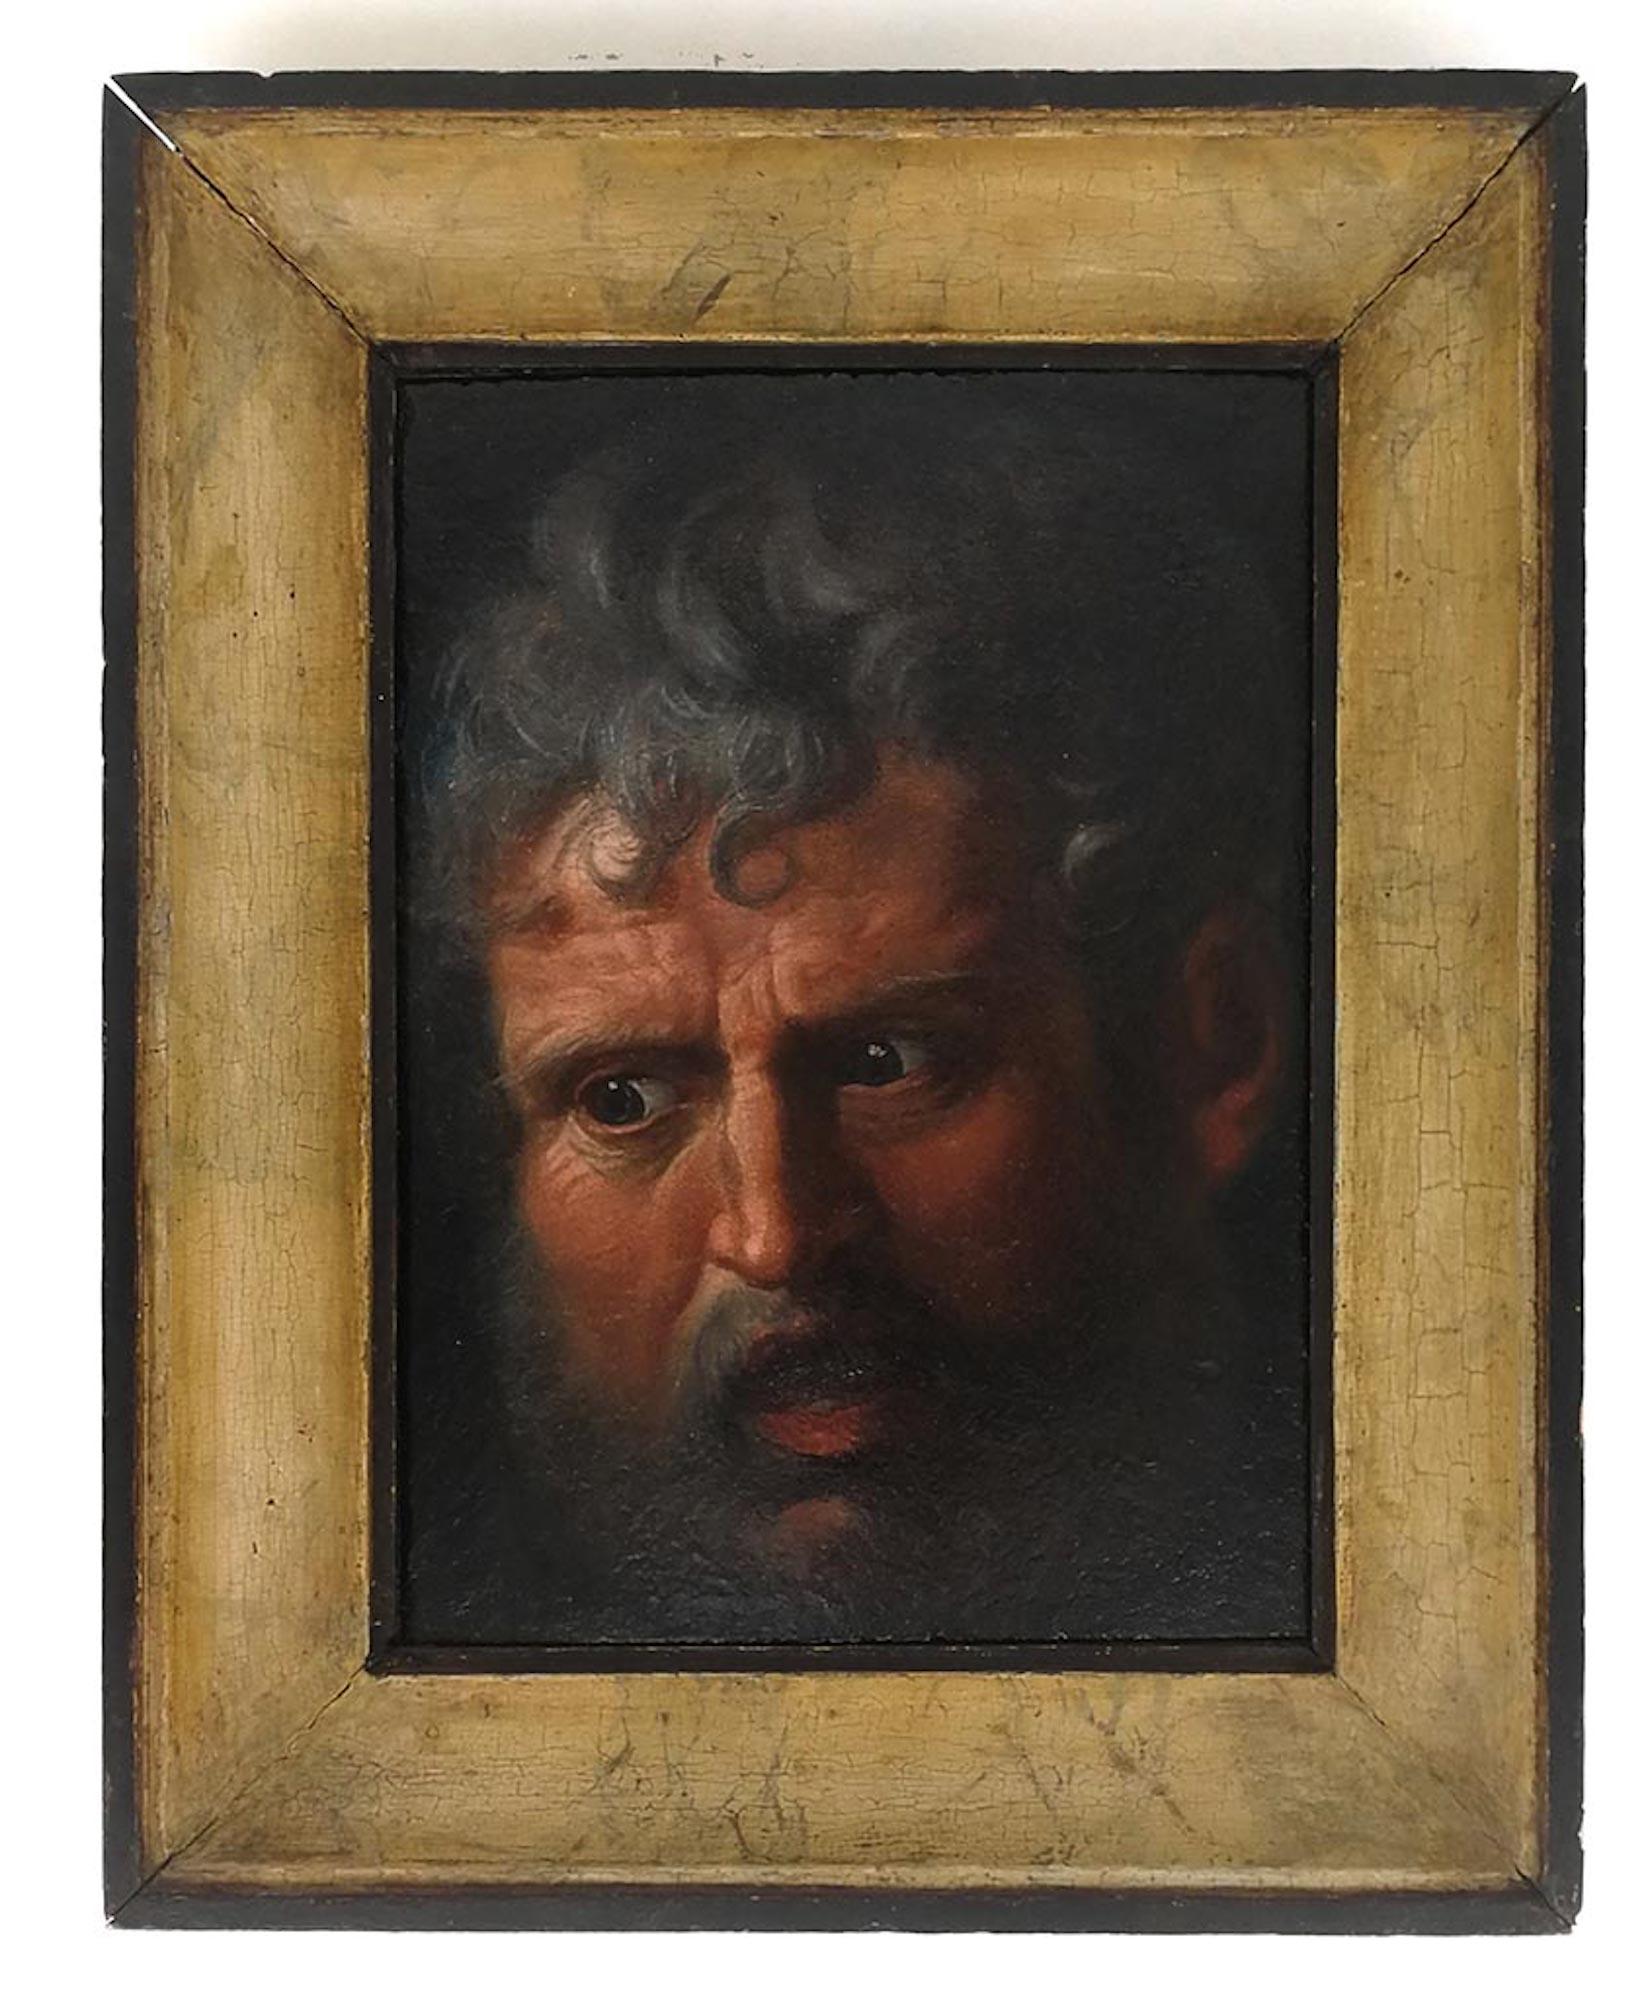 Unknown Figurative Painting - Study for a Head of Man - Oil on Panel by Anonymous 18th Century Painter